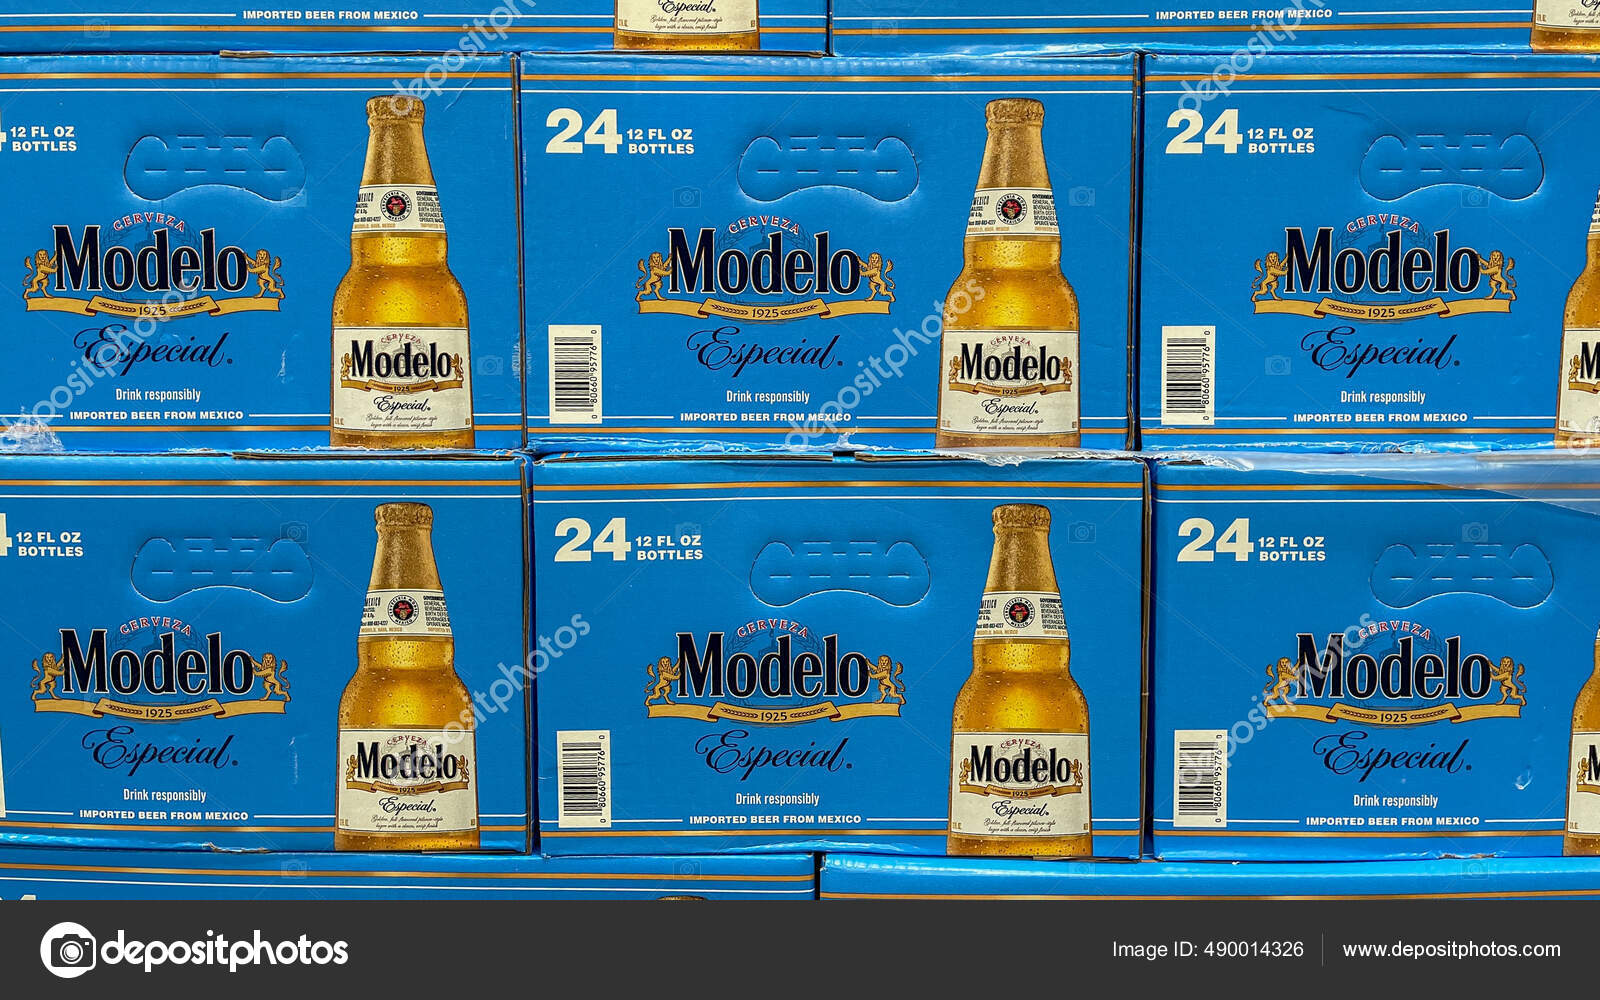 Beer cases Stock Photos, Royalty Free Beer cases Images | Depositphotos